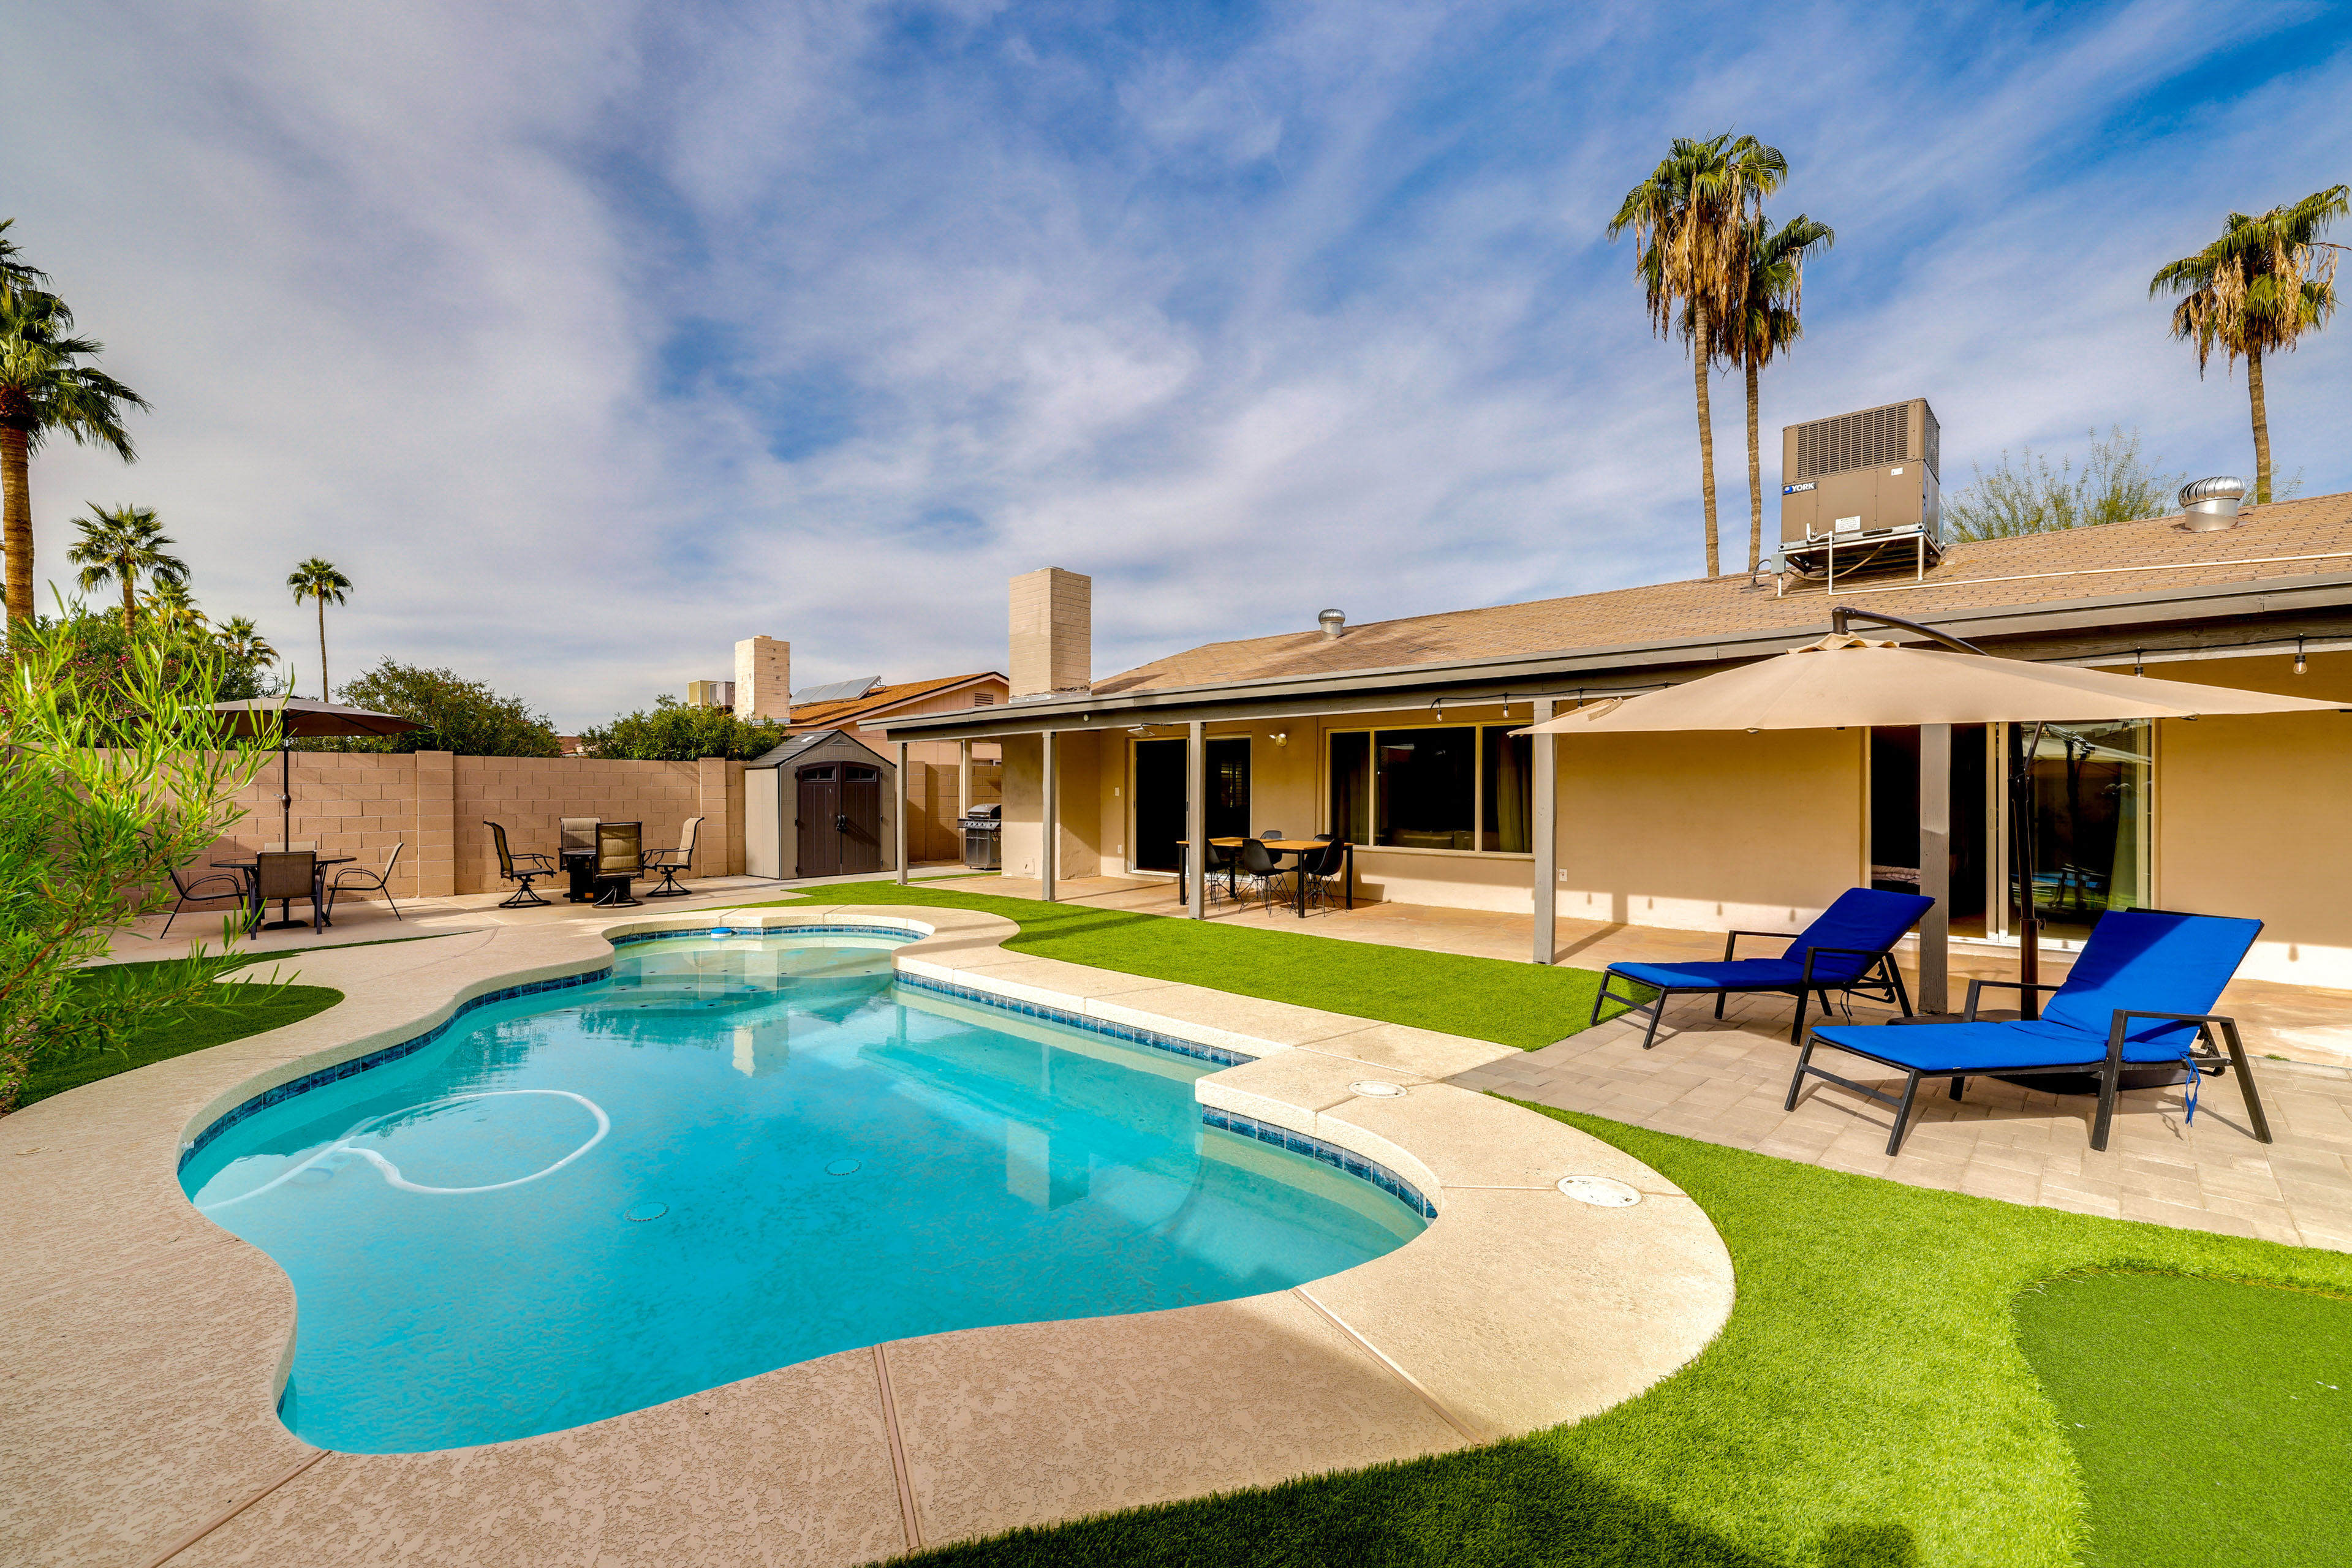 Property Image 1 - Central Scottsdale Home w/ Pool & Putting Green!